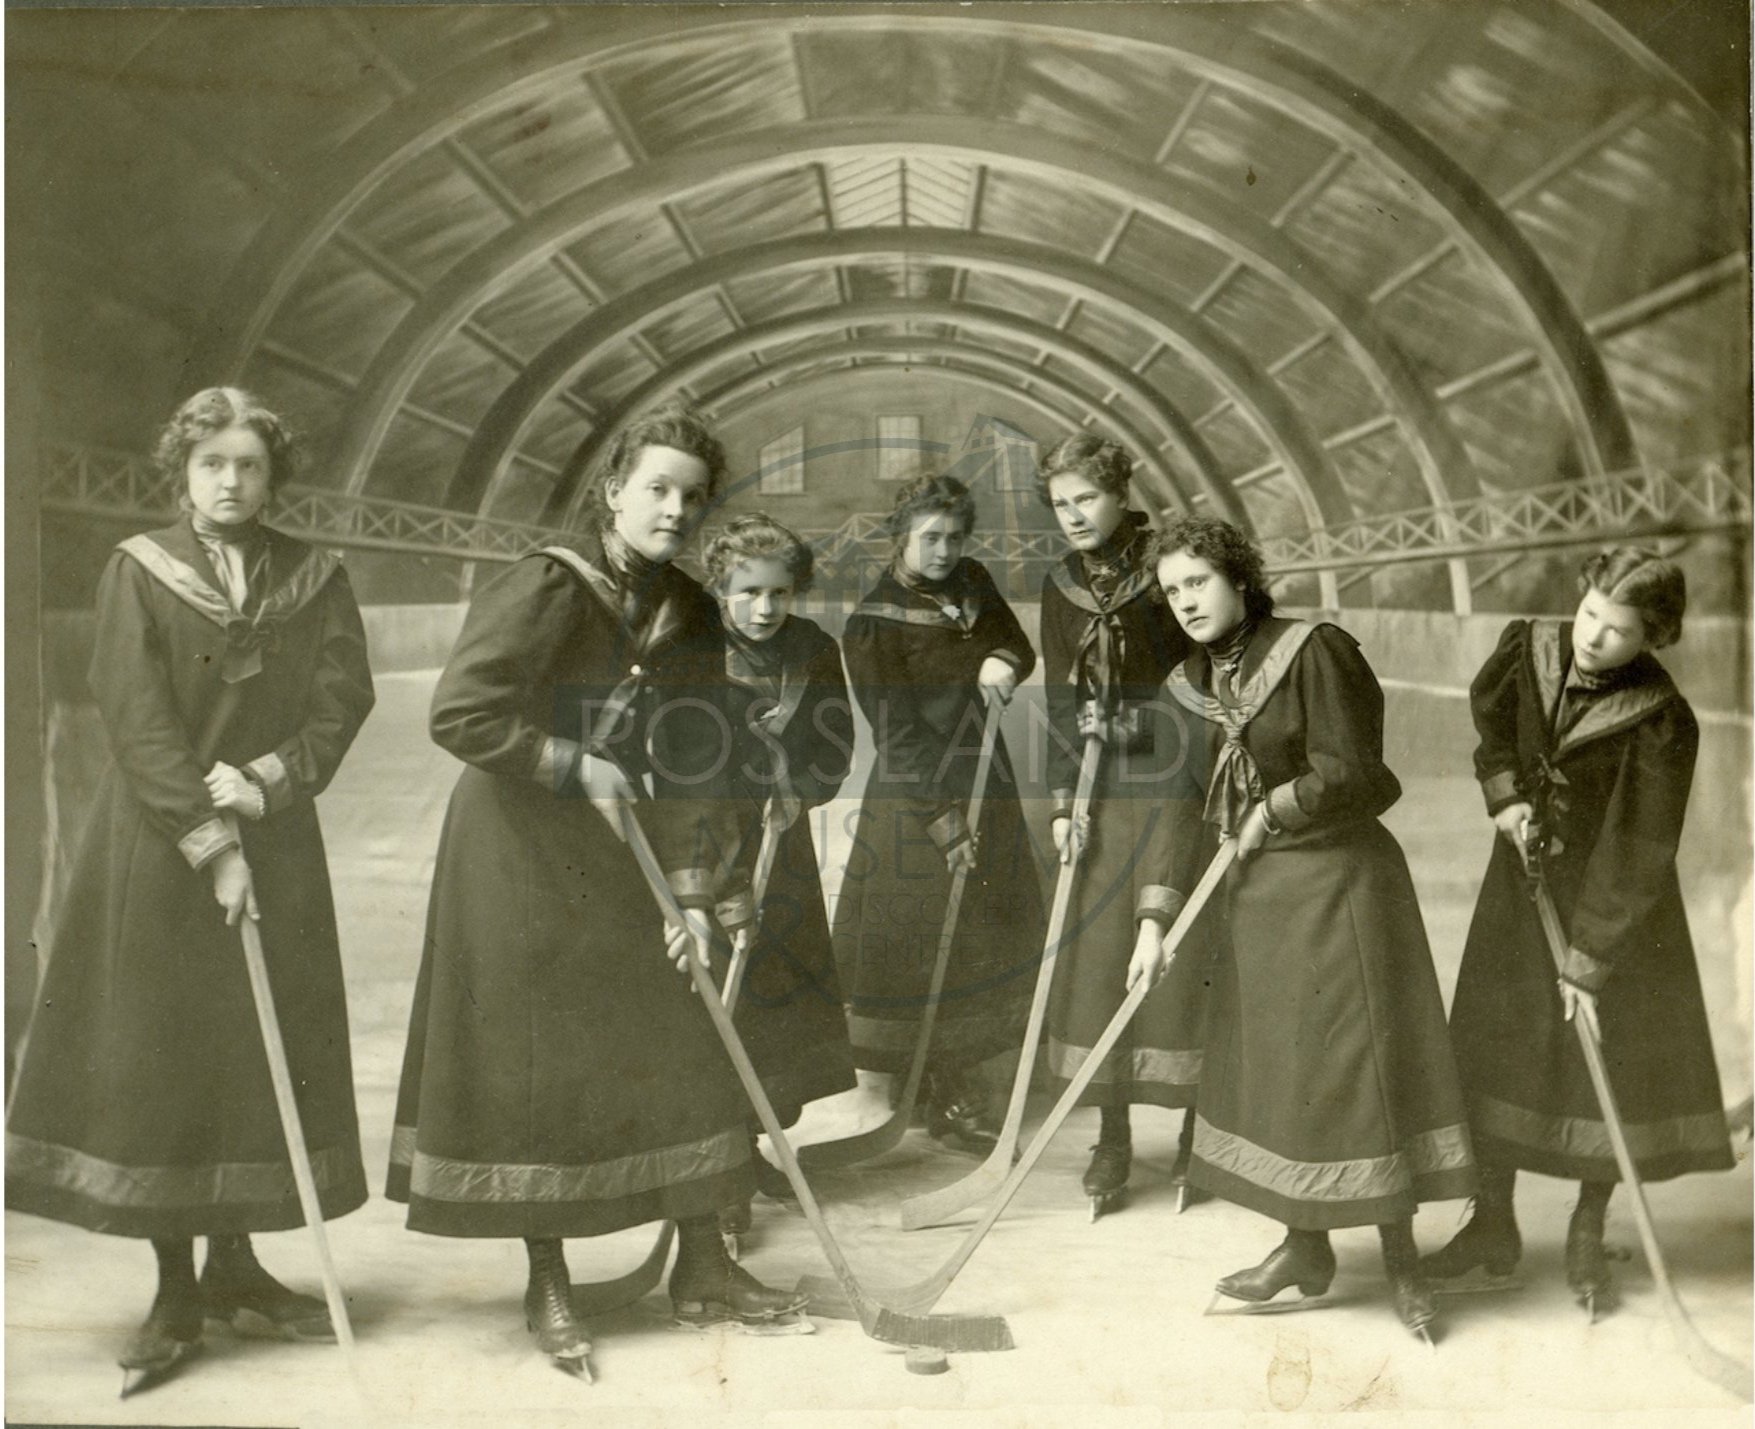   2285.0006 : Rossland Ladies’ Hockey Team in the Rossland Arena, circa 1900.  Left to Right: Alice Cooper, Blackman, Mellie Inches, Effie Agnew, and Alice Northy. 